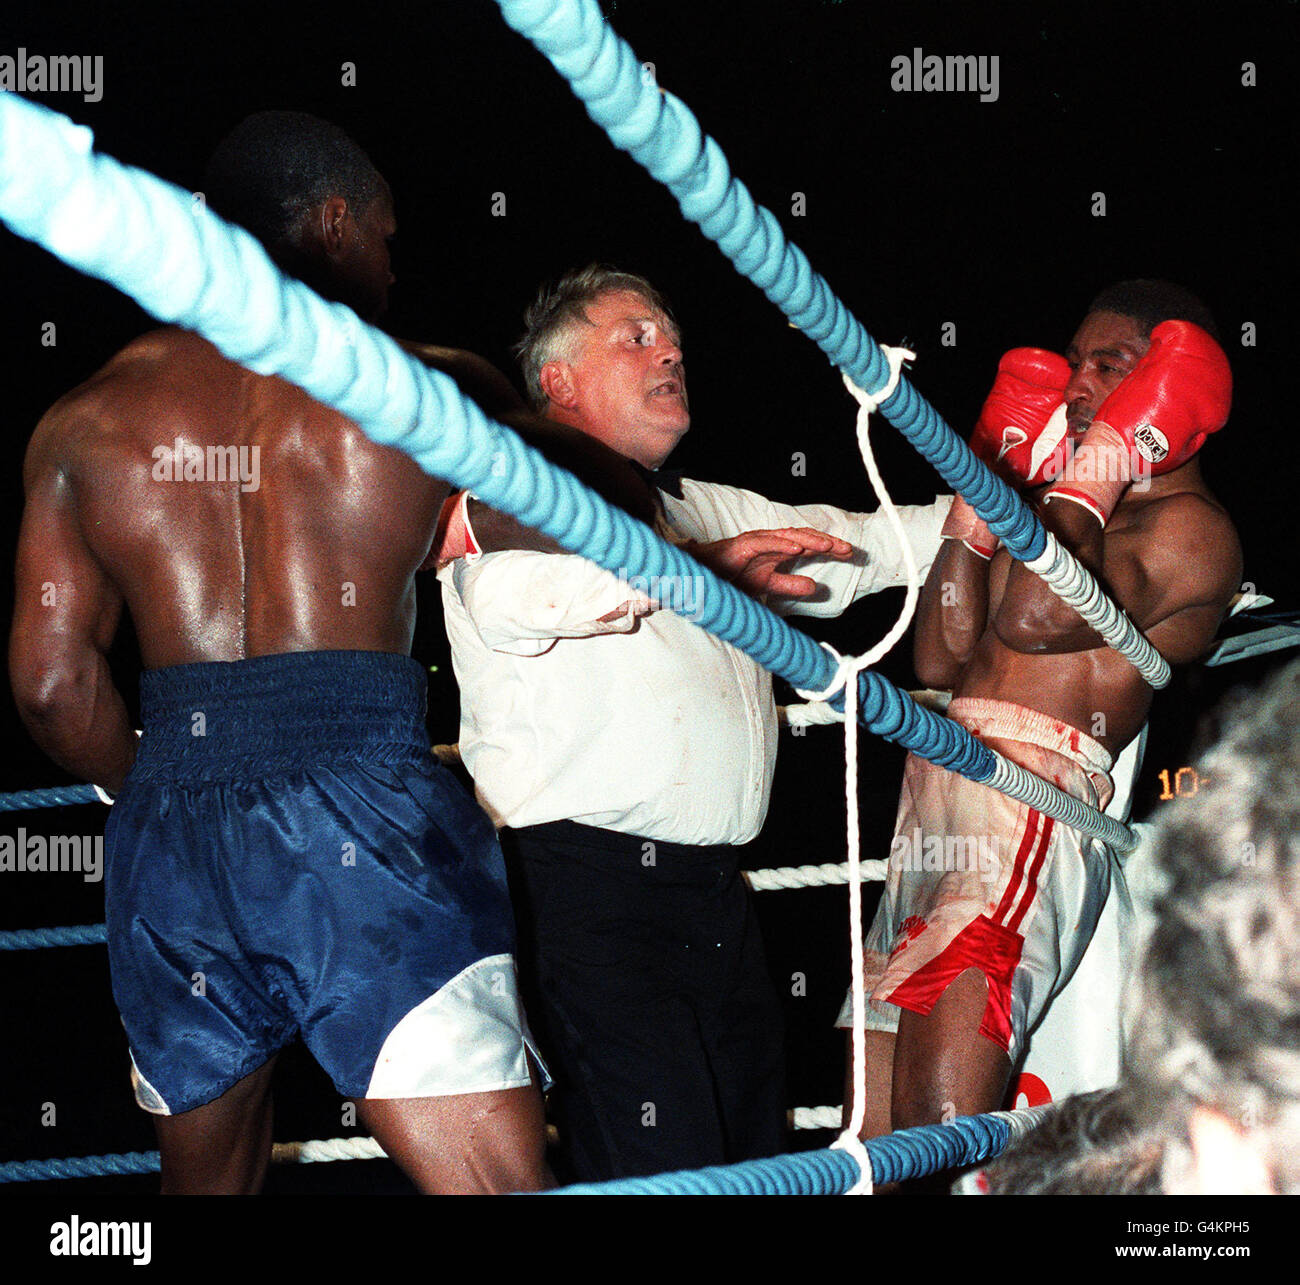 The referee stops the WBO Super Middleweight fight between Michael Watson (right) and Chris Eubank, in Eubank's favour, at Tottenham's White Hart Lane ground in London. Watson collapsed in his corner after the fight. * 24/9/99: A high court judge has ruled that the British Boxing Board of Control was liable for the brain damage suffered by Watson in the fight with Eubank. 19/12/2000: The British Boxing Board of Control lost its appeal against a ruling that it was liable for the devastating brain damage suffered by the fighter. Stock Photo